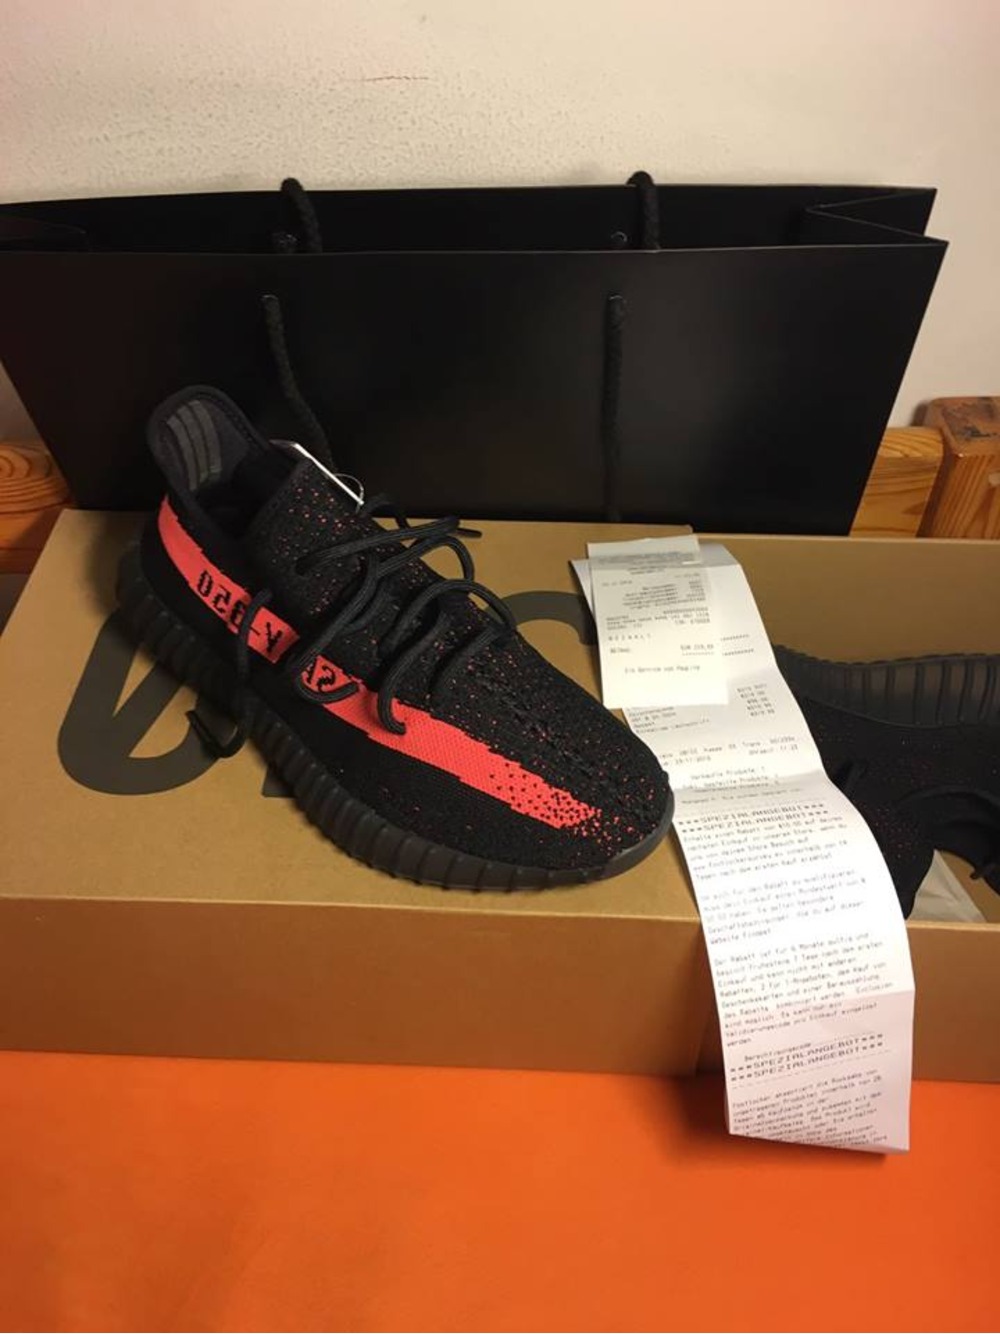 Yeezy Boost 350 v2 Black Red Size 9